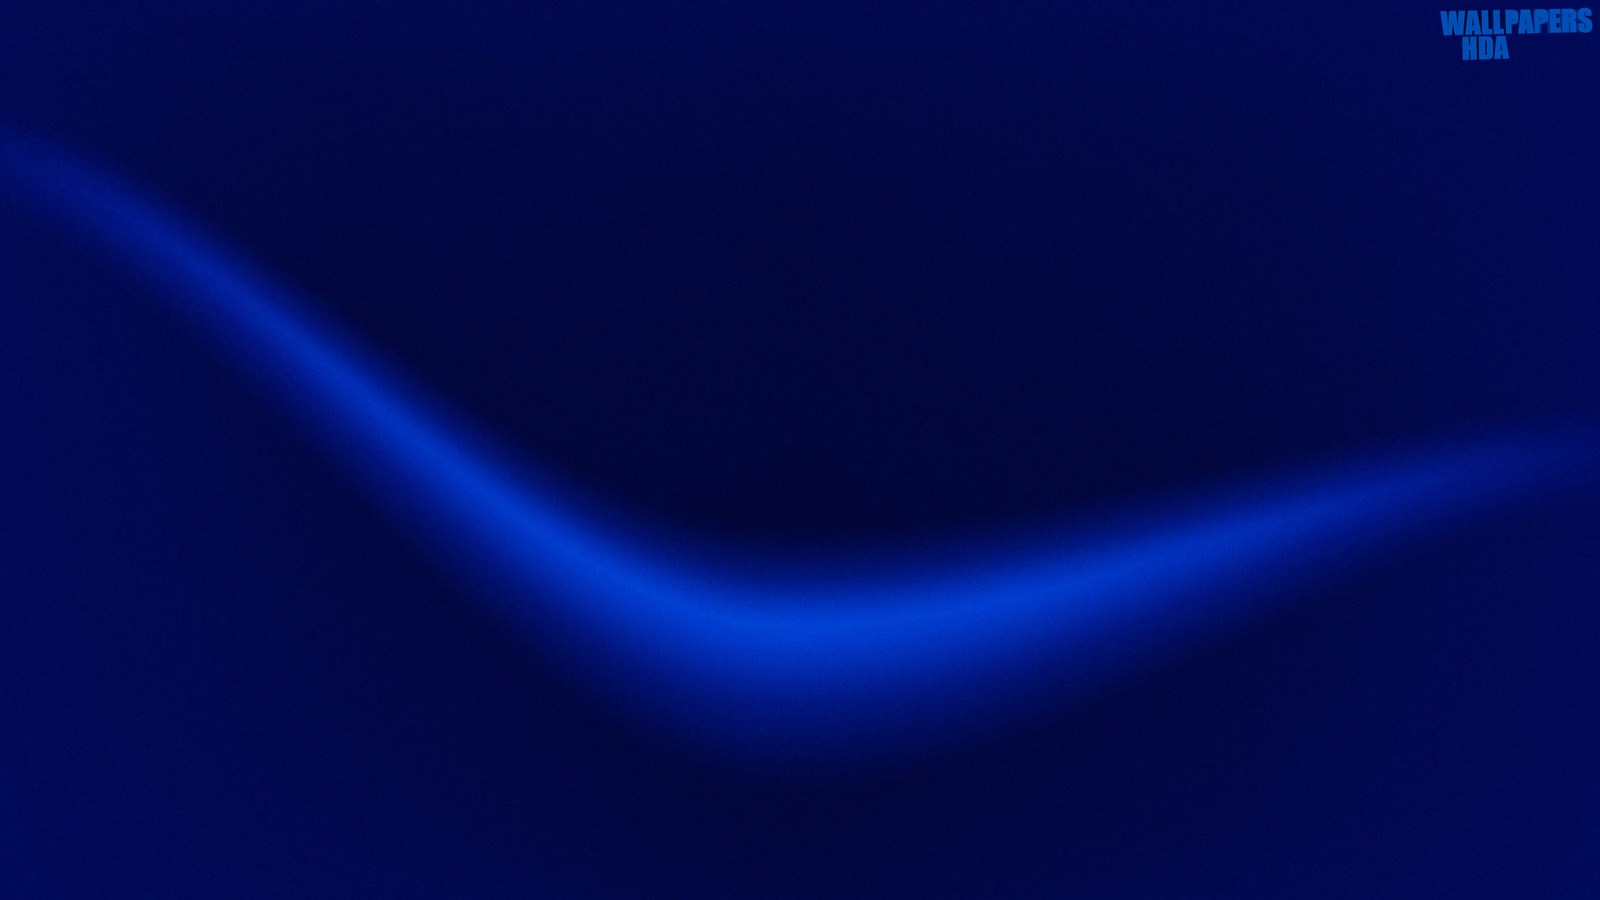 Abstract graphic design blue wallpaper 1600x900